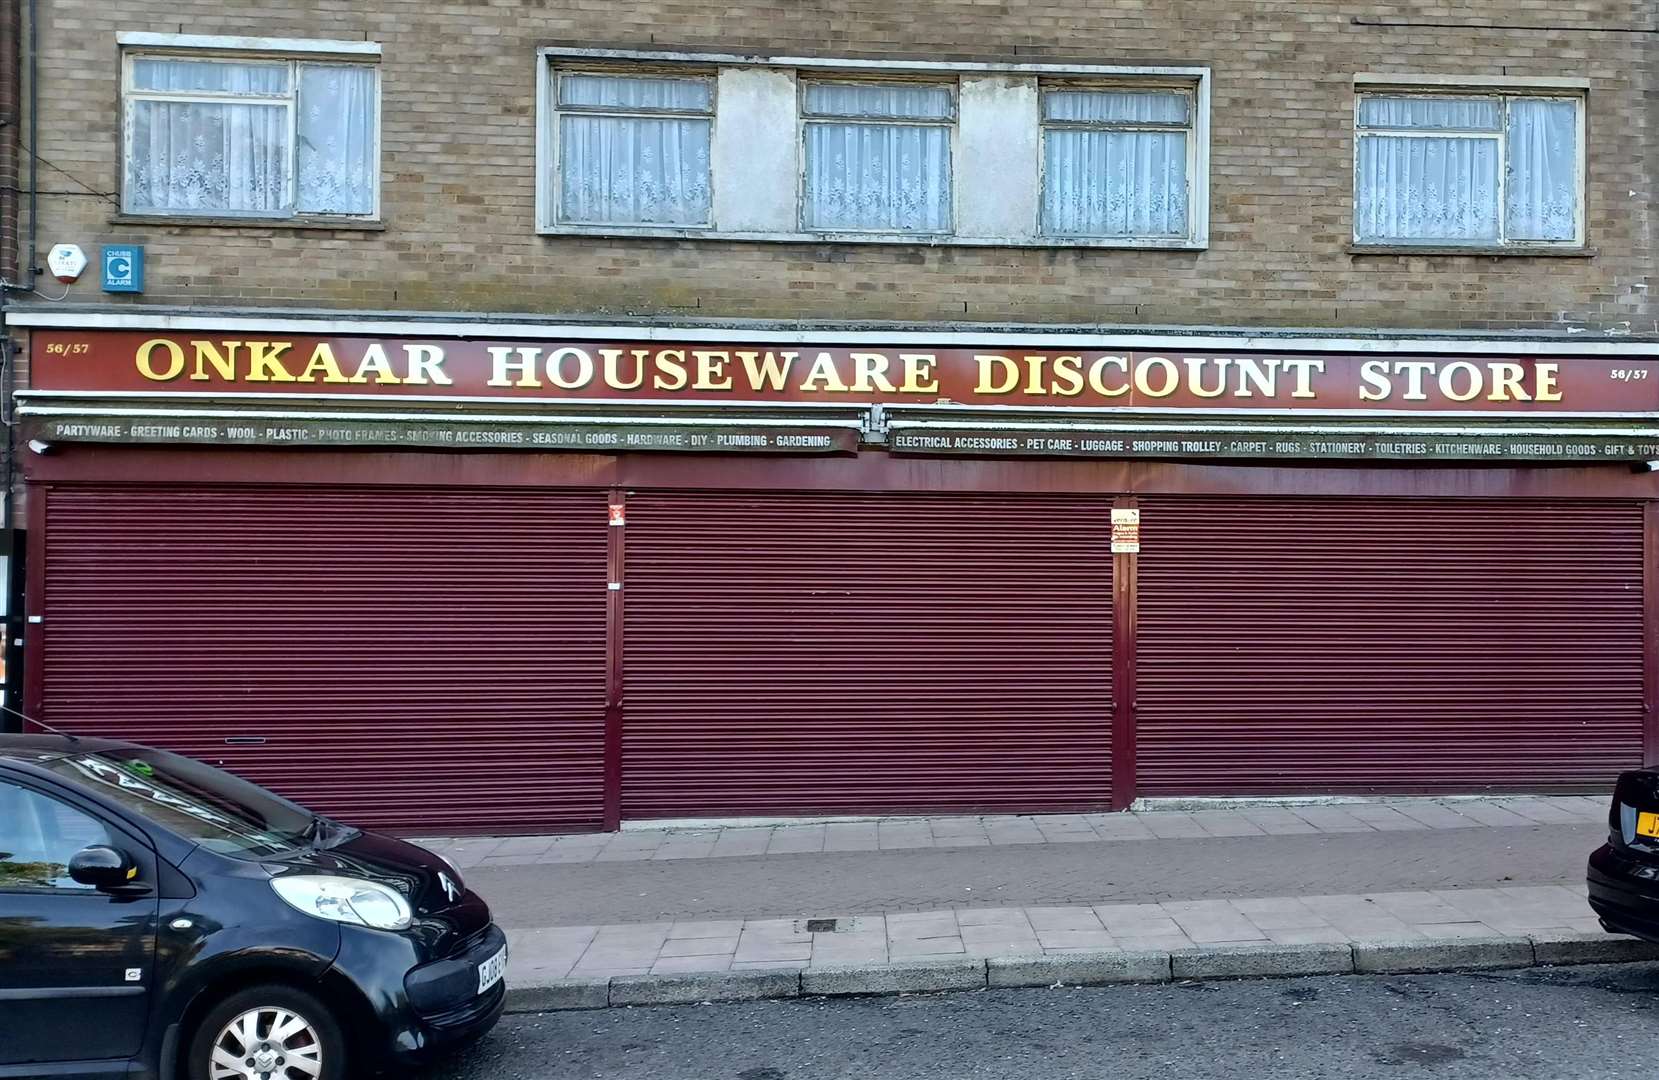 Onkaar Houseware Discount Store in Twydall was once one of Medway’s four Woolworths